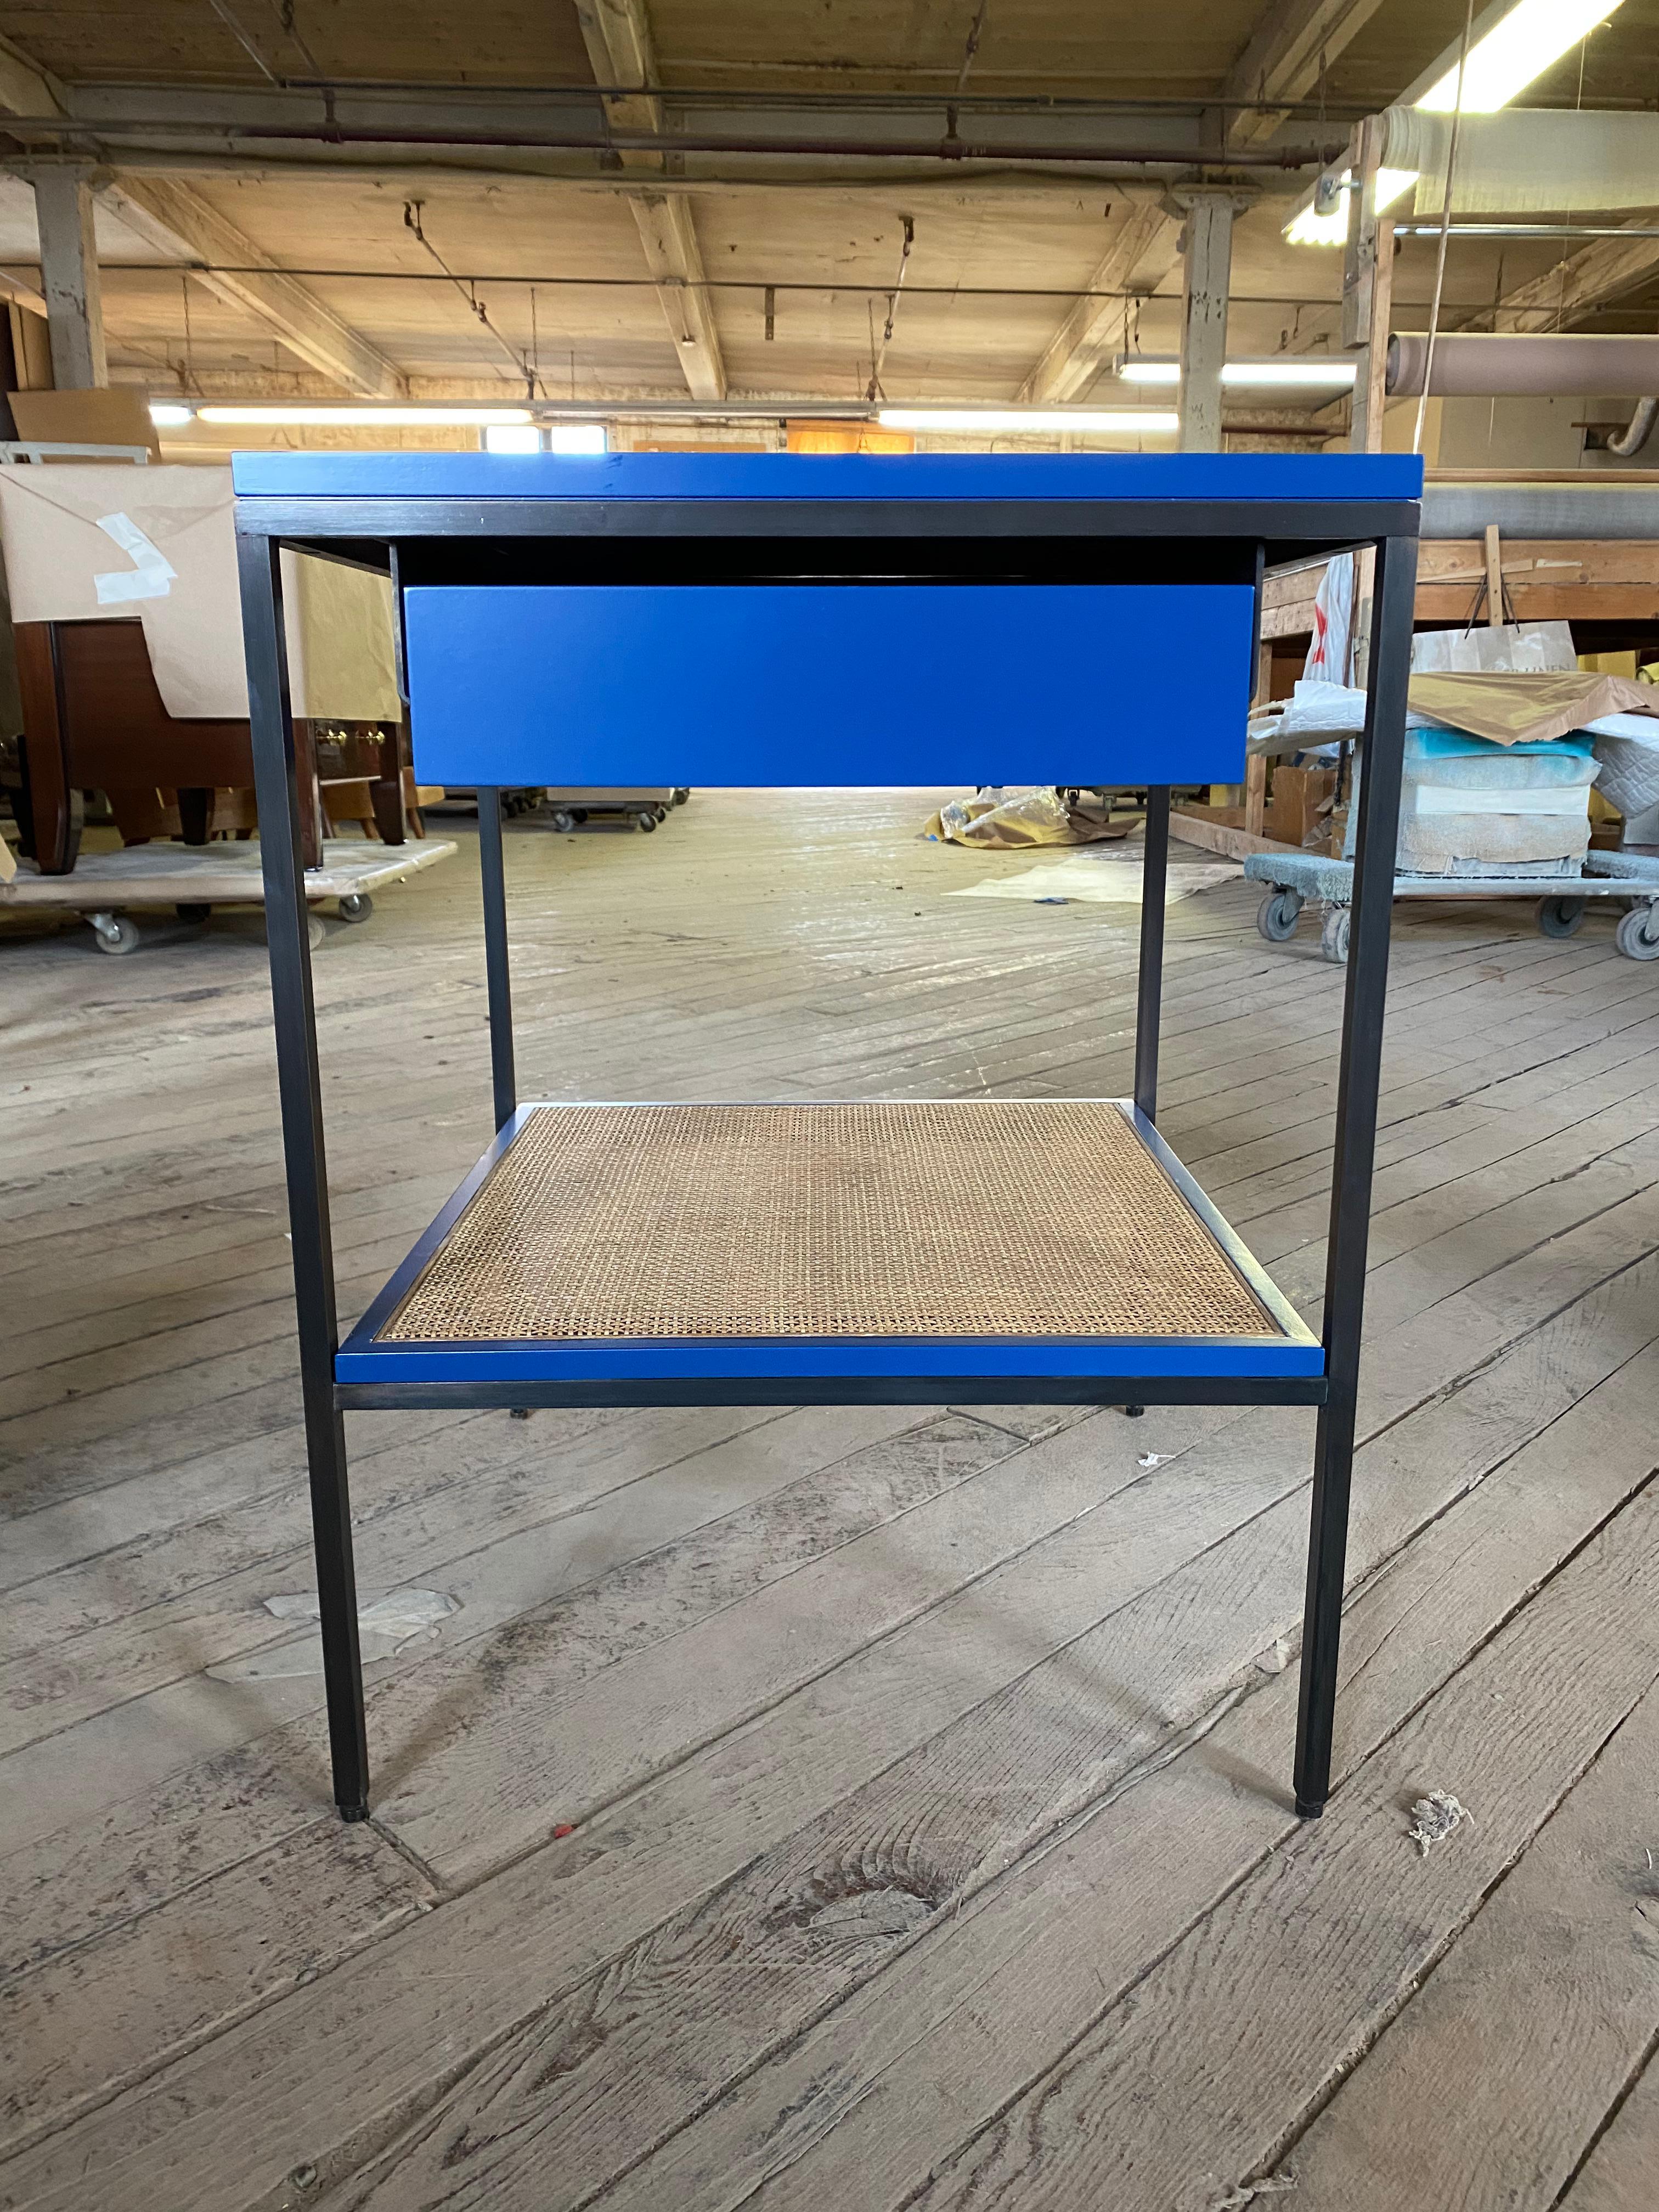 Our classic lacquer, cane and bronze bedside tables in our standard size. Shown here in BM Downpour blue #2063-20 on oiled bronze frames with medium toned caned shelves. Made to order. Local manufacturing with flawless attention to detail.